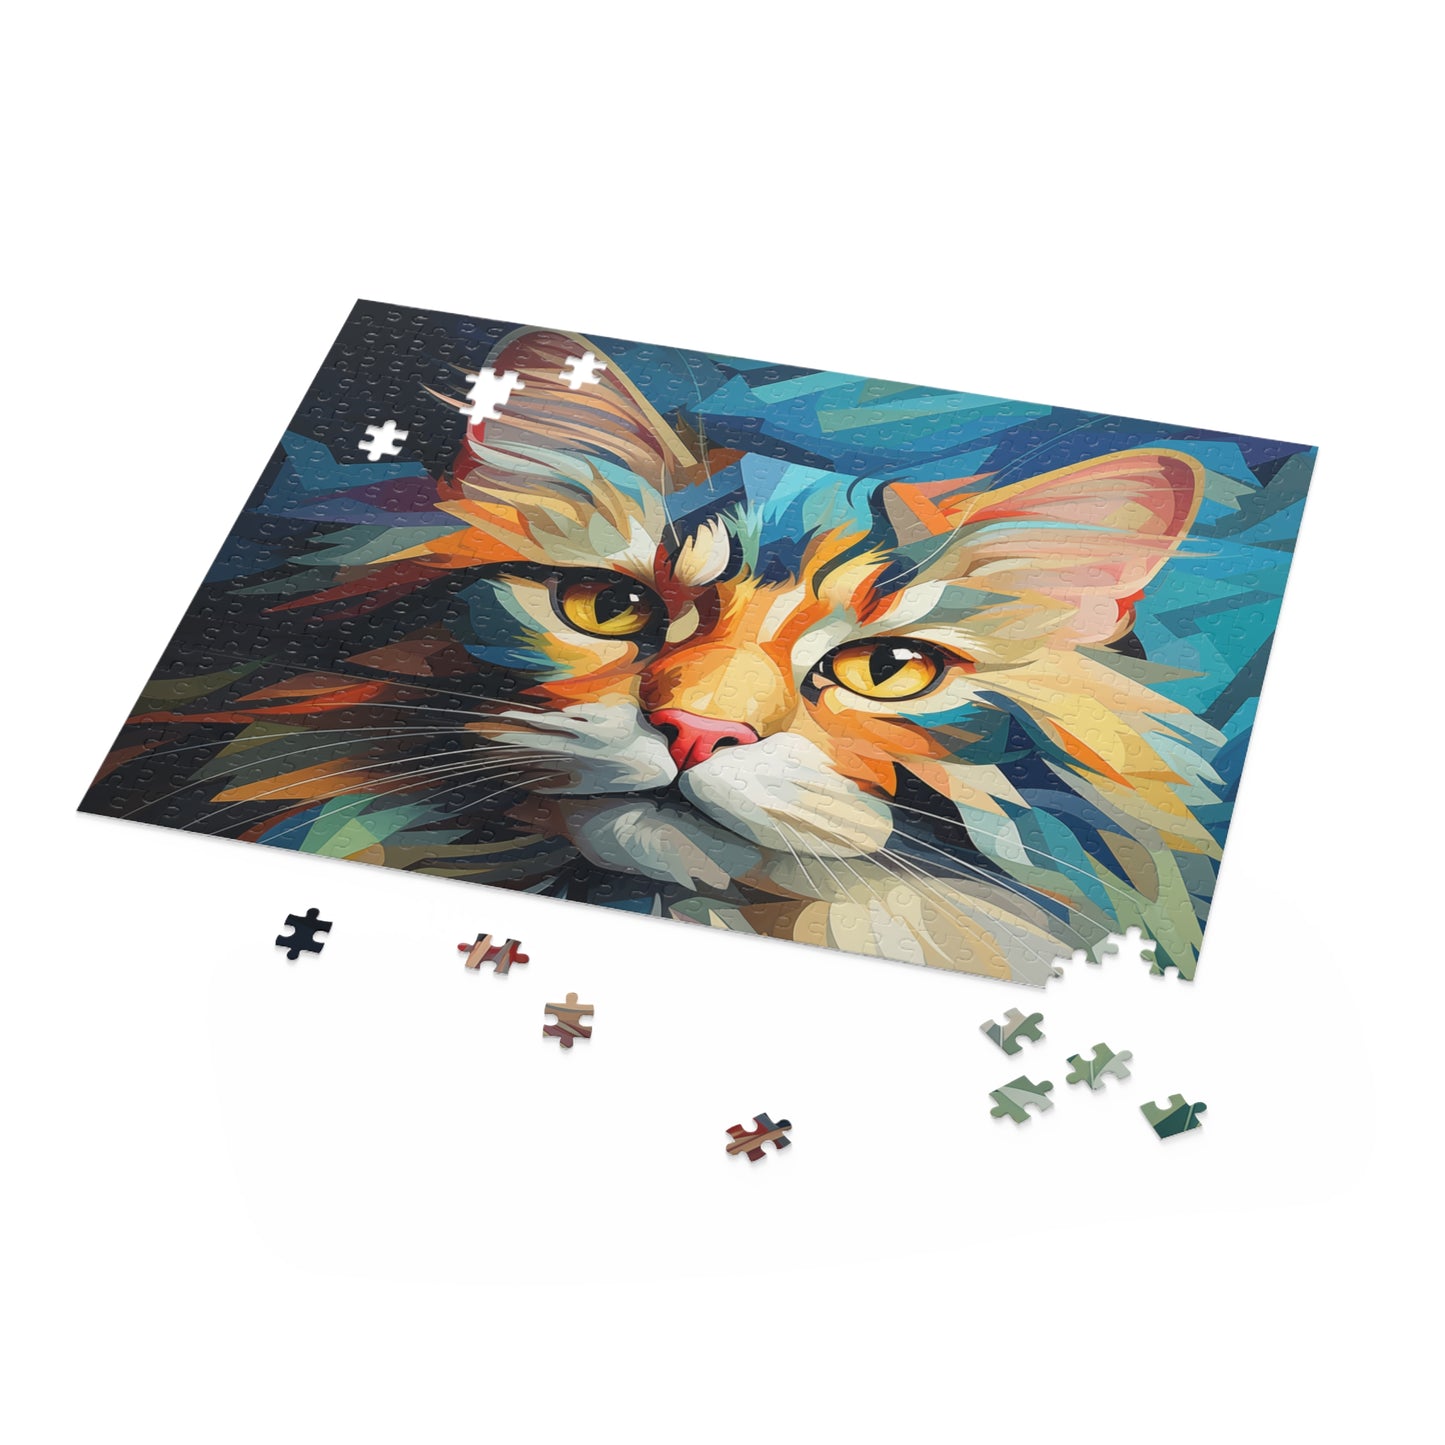 Abstract Oil Paint Watercolor Cat Jigsaw Puzzle Adult Birthday Business Jigsaw Puzzle Gift for Him Funny Humorous Indoor Outdoor Game Gift For Her Online-5